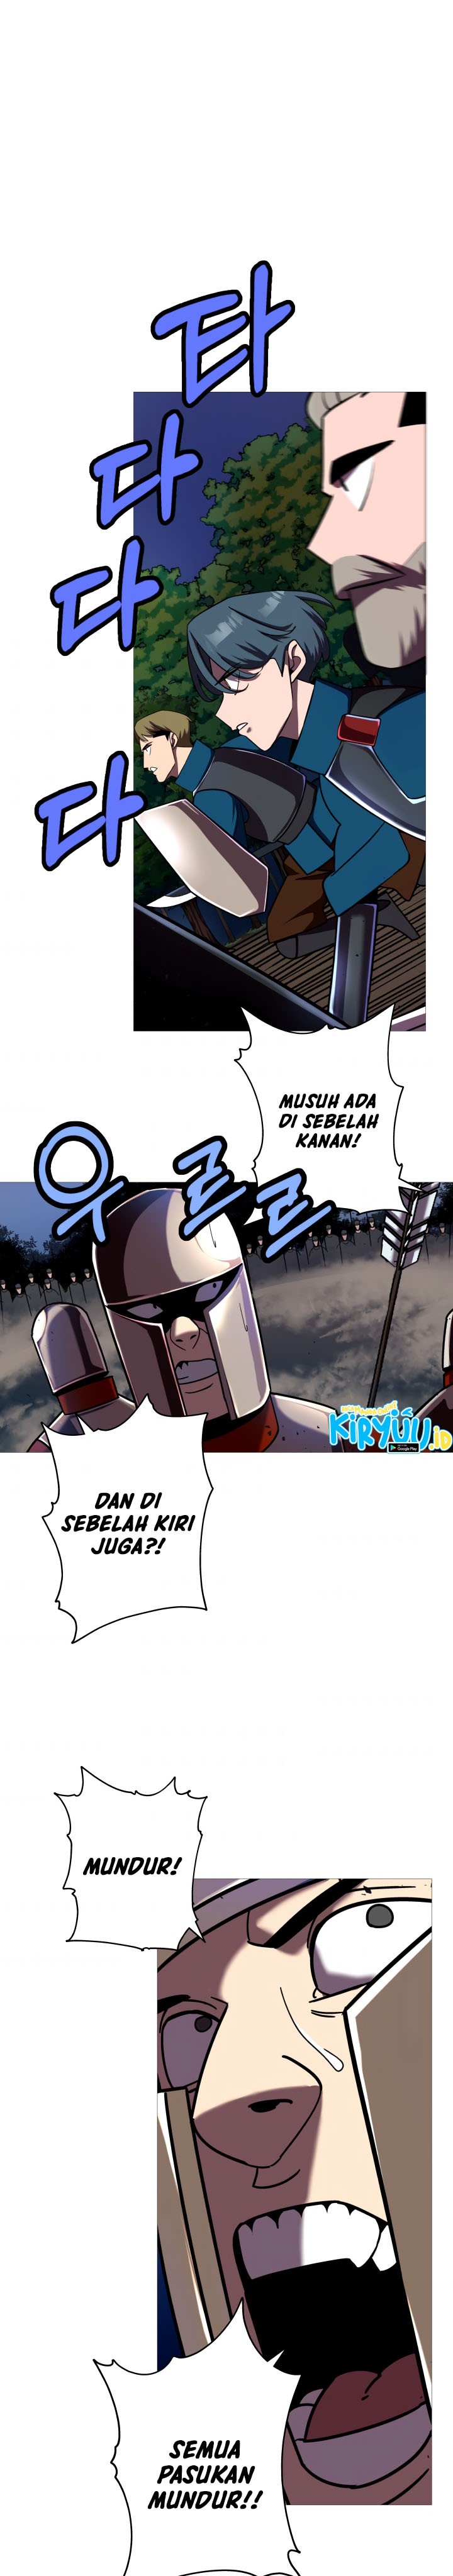 Dilarang COPAS - situs resmi www.mangacanblog.com - Komik the story of a low rank soldier becoming a monarch 015 - chapter 15 16 Indonesia the story of a low rank soldier becoming a monarch 015 - chapter 15 Terbaru 33|Baca Manga Komik Indonesia|Mangacan